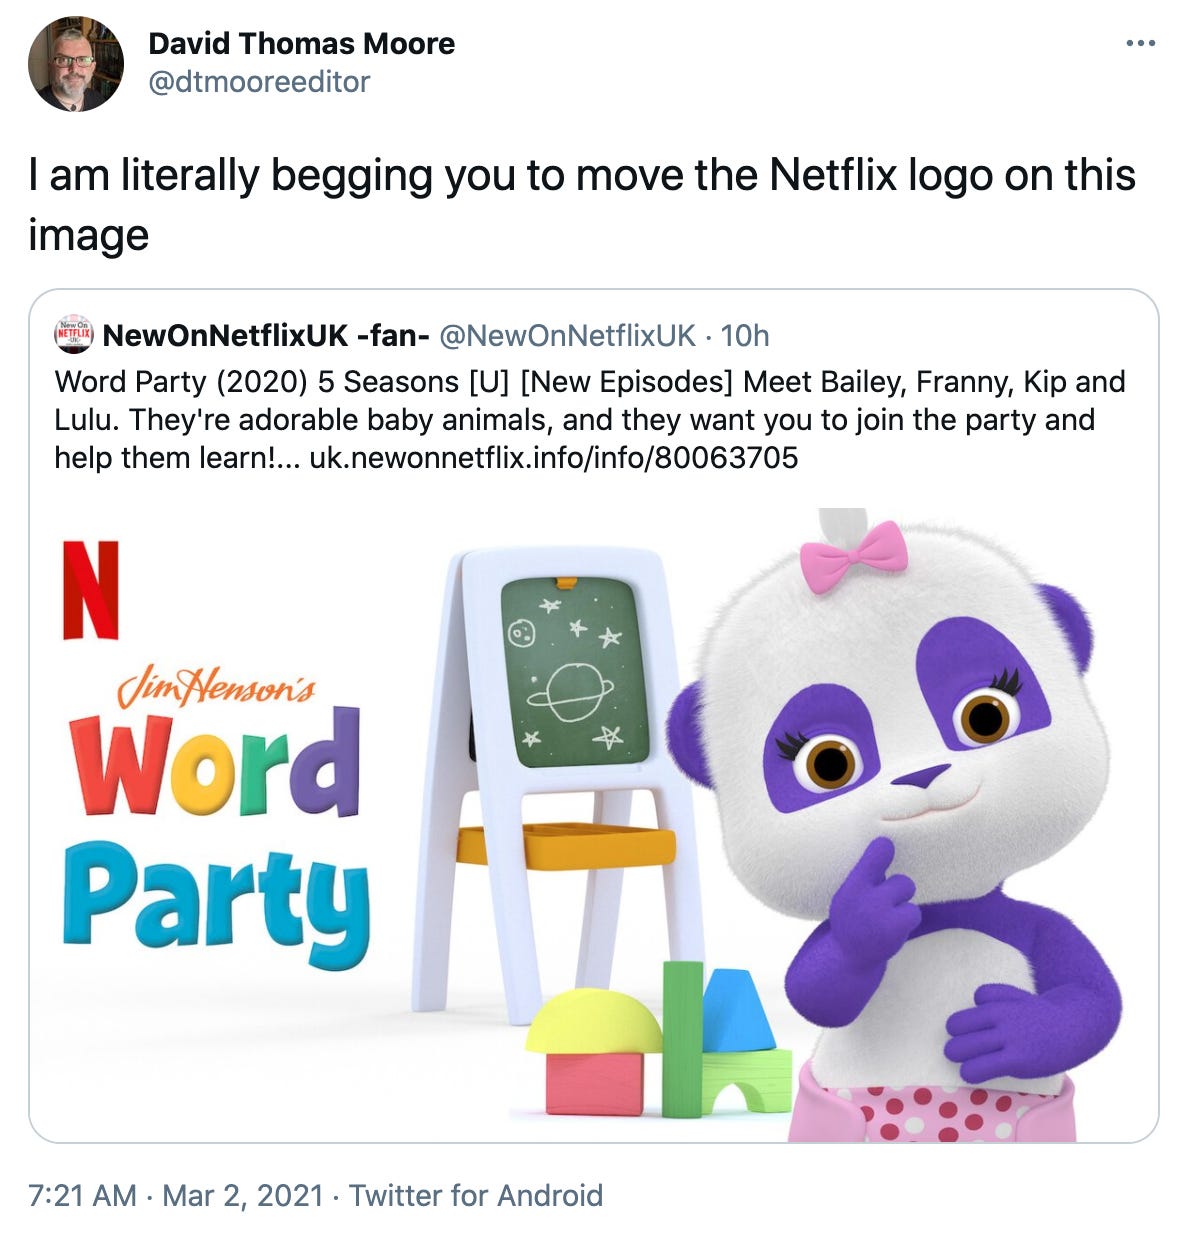 Tweet reading "I am literally begging you to move the Netflix logo on this image" above a tweet promoting a show that looks like it's named "Jim Henson's N Word Party"